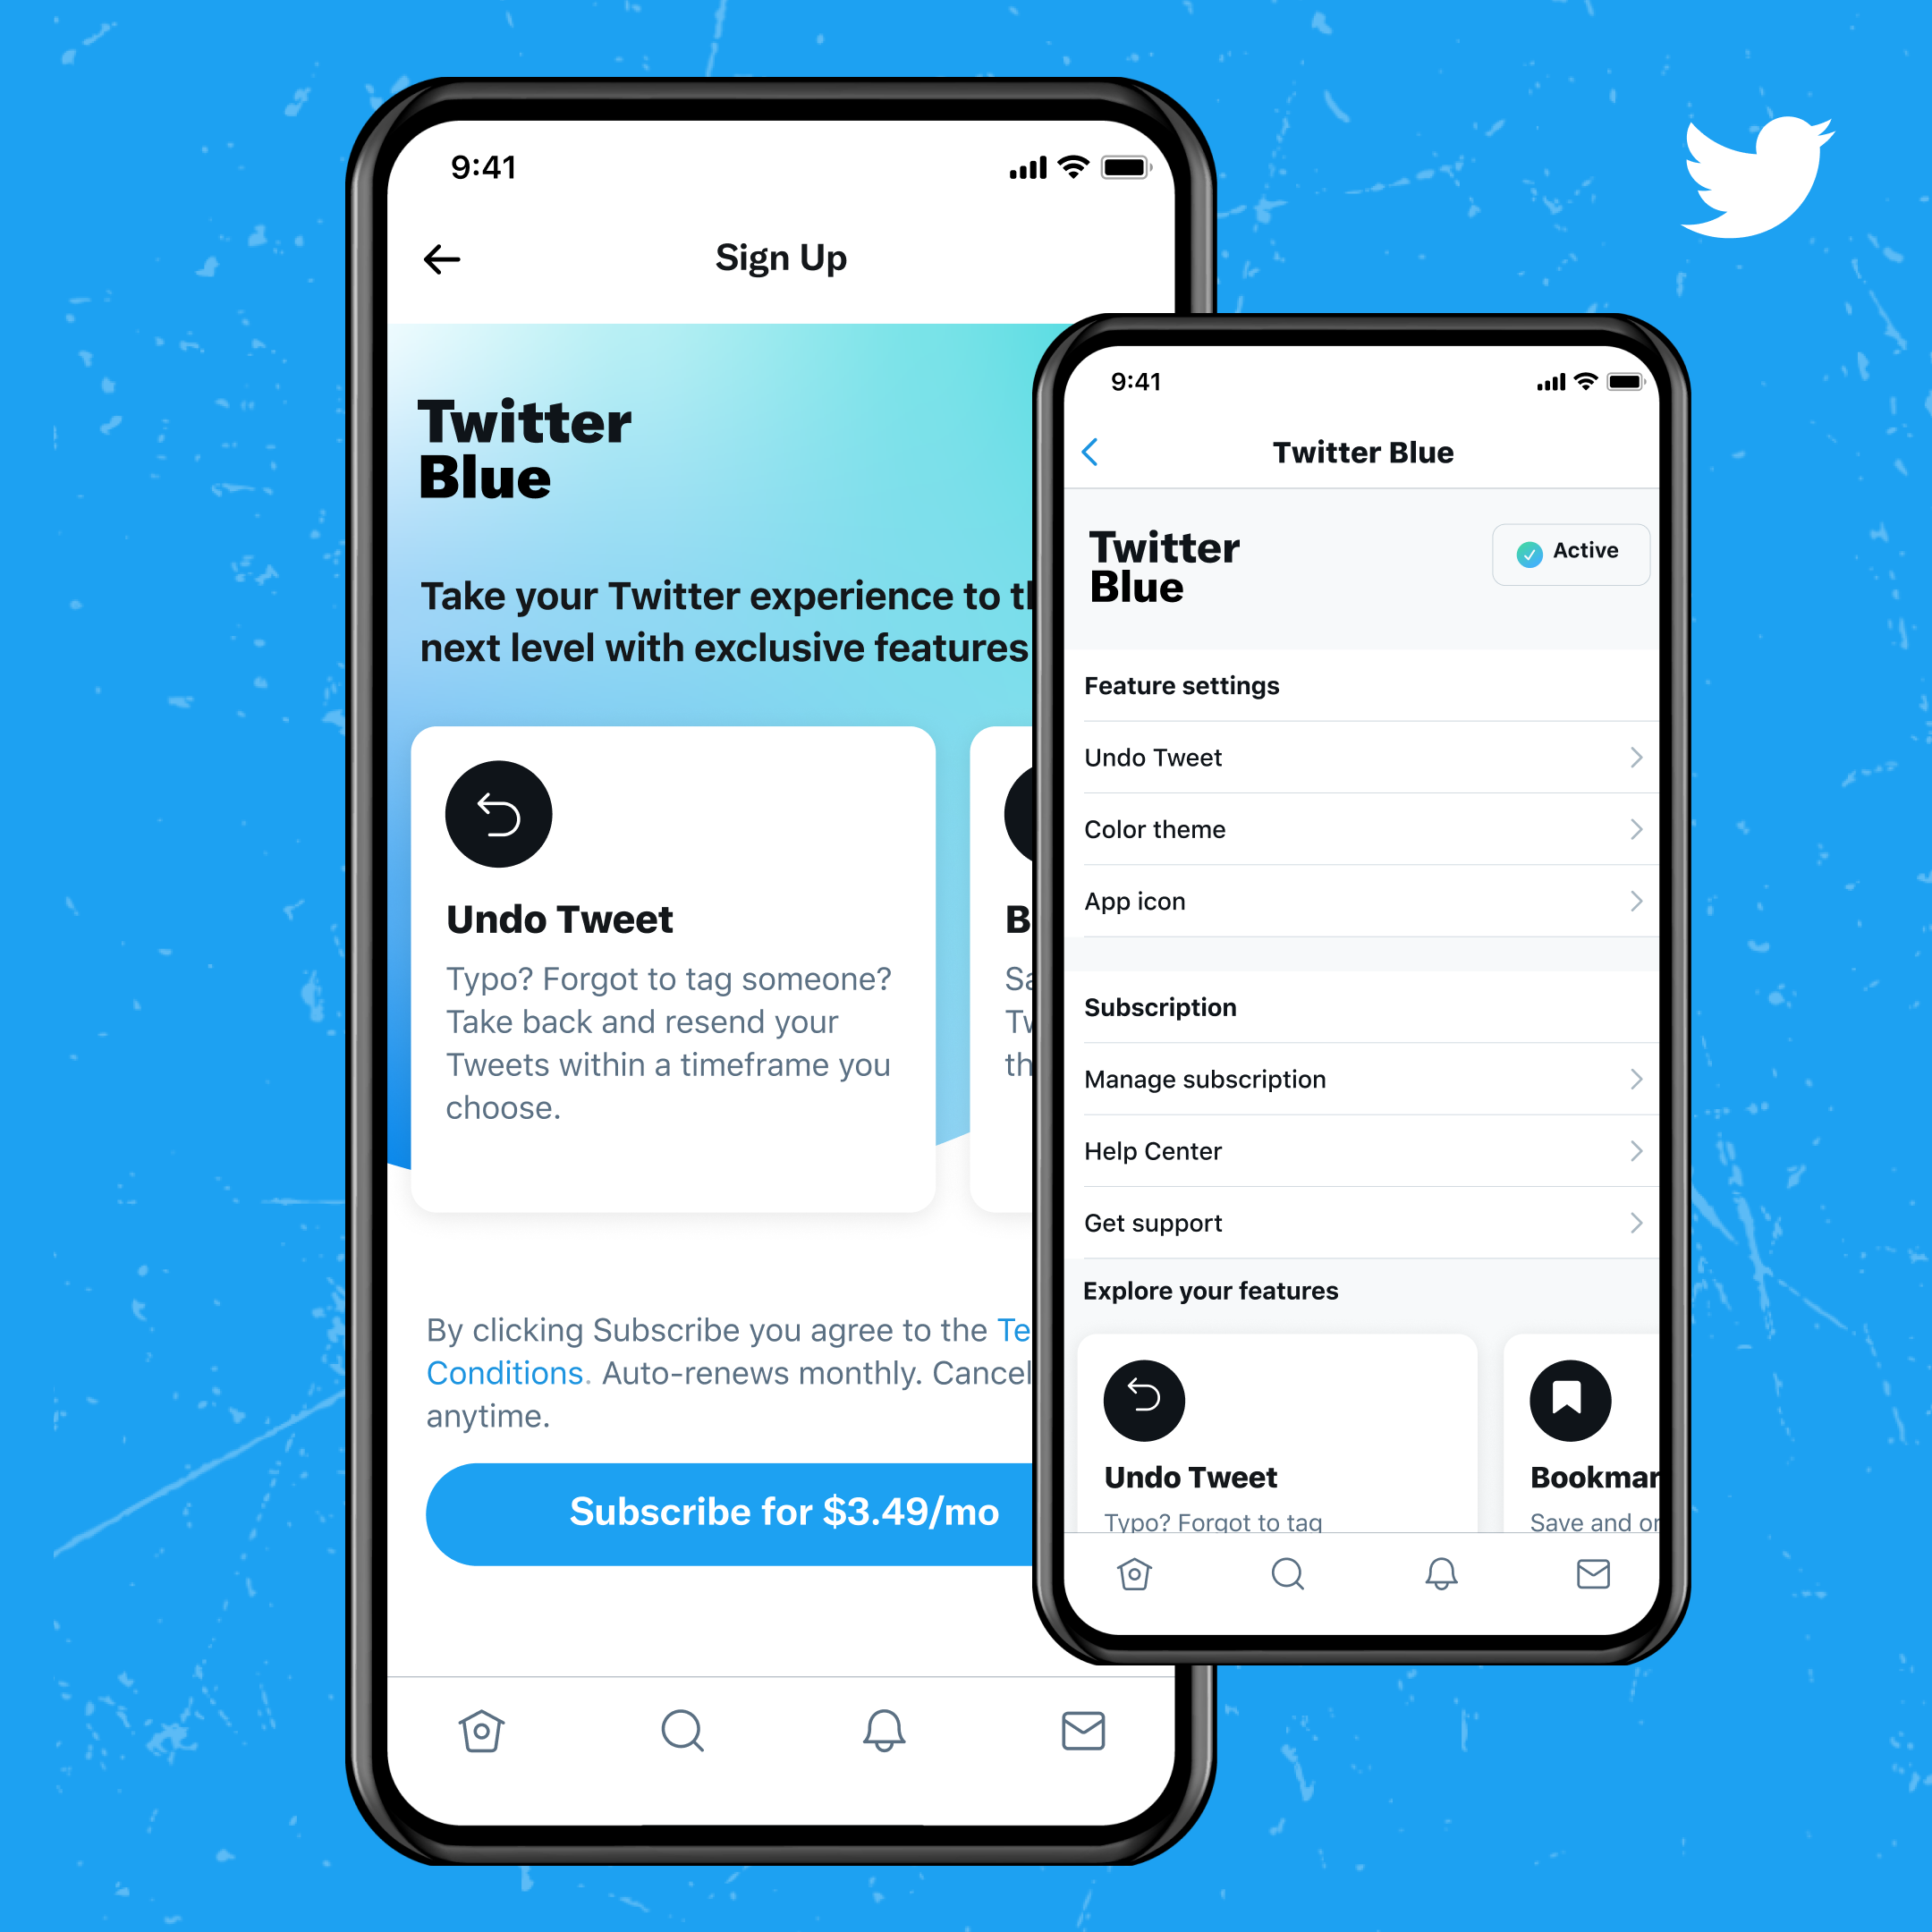 Lock It Down: How to Use 2FA on Twitter Without Paying for Twitter